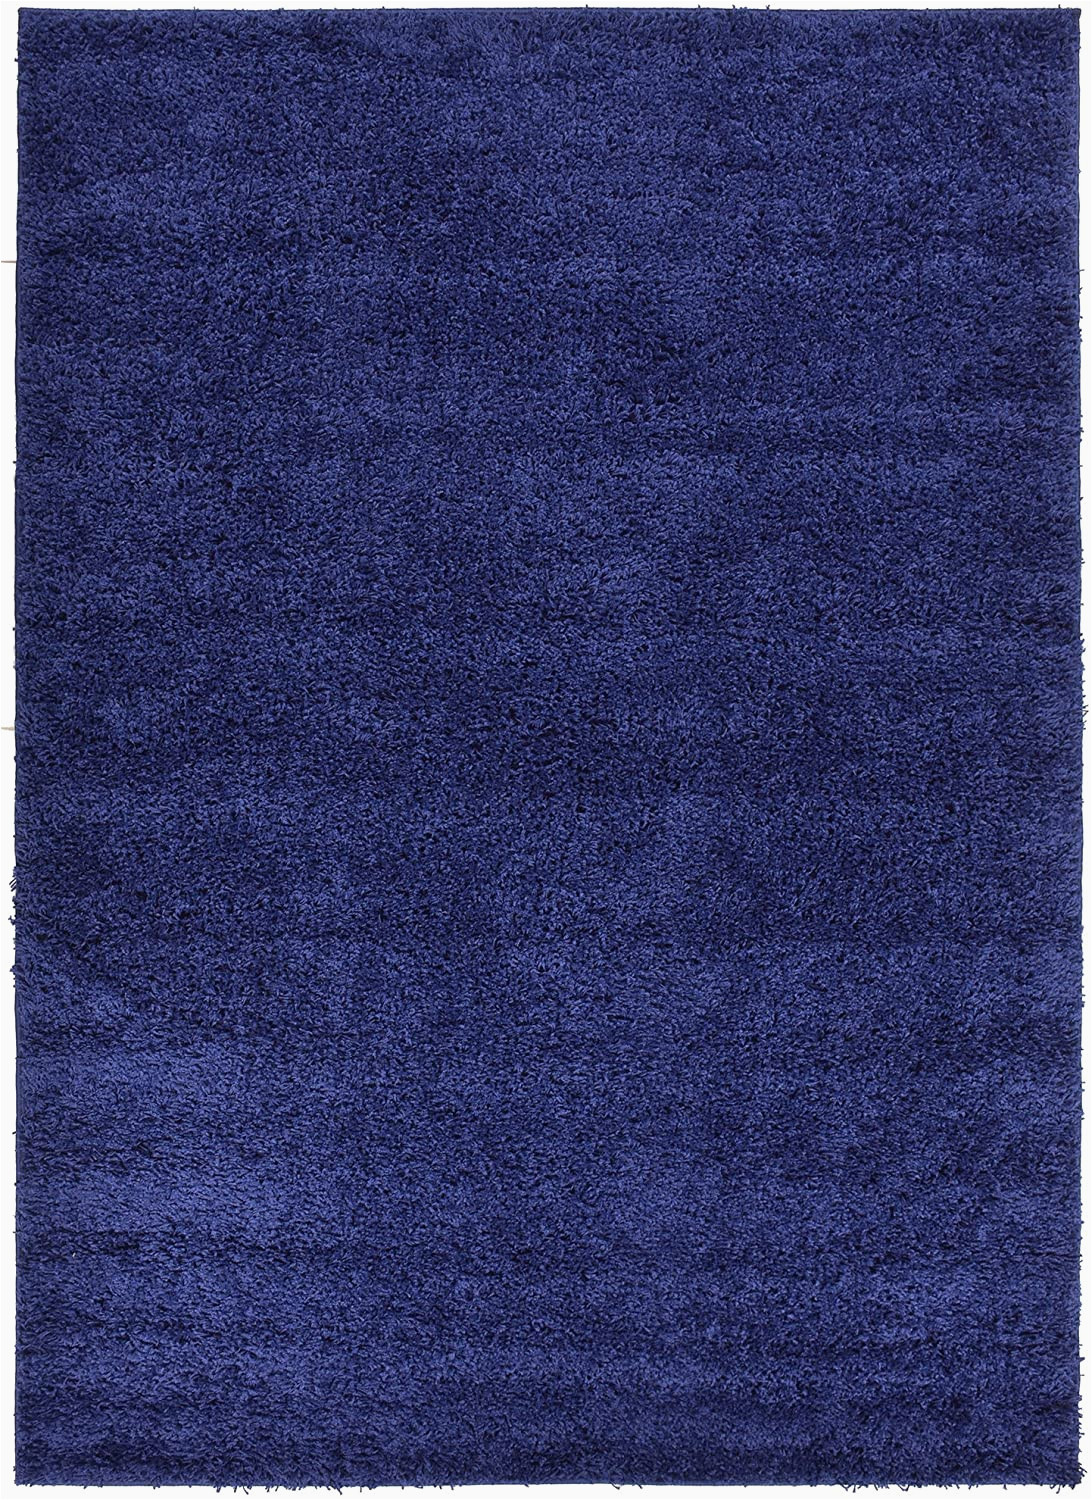 Blue Shaggy area Rug solid Color New Navy Blue Shag area Rug Rugs Shaggy Collection Navy Blue 4×53